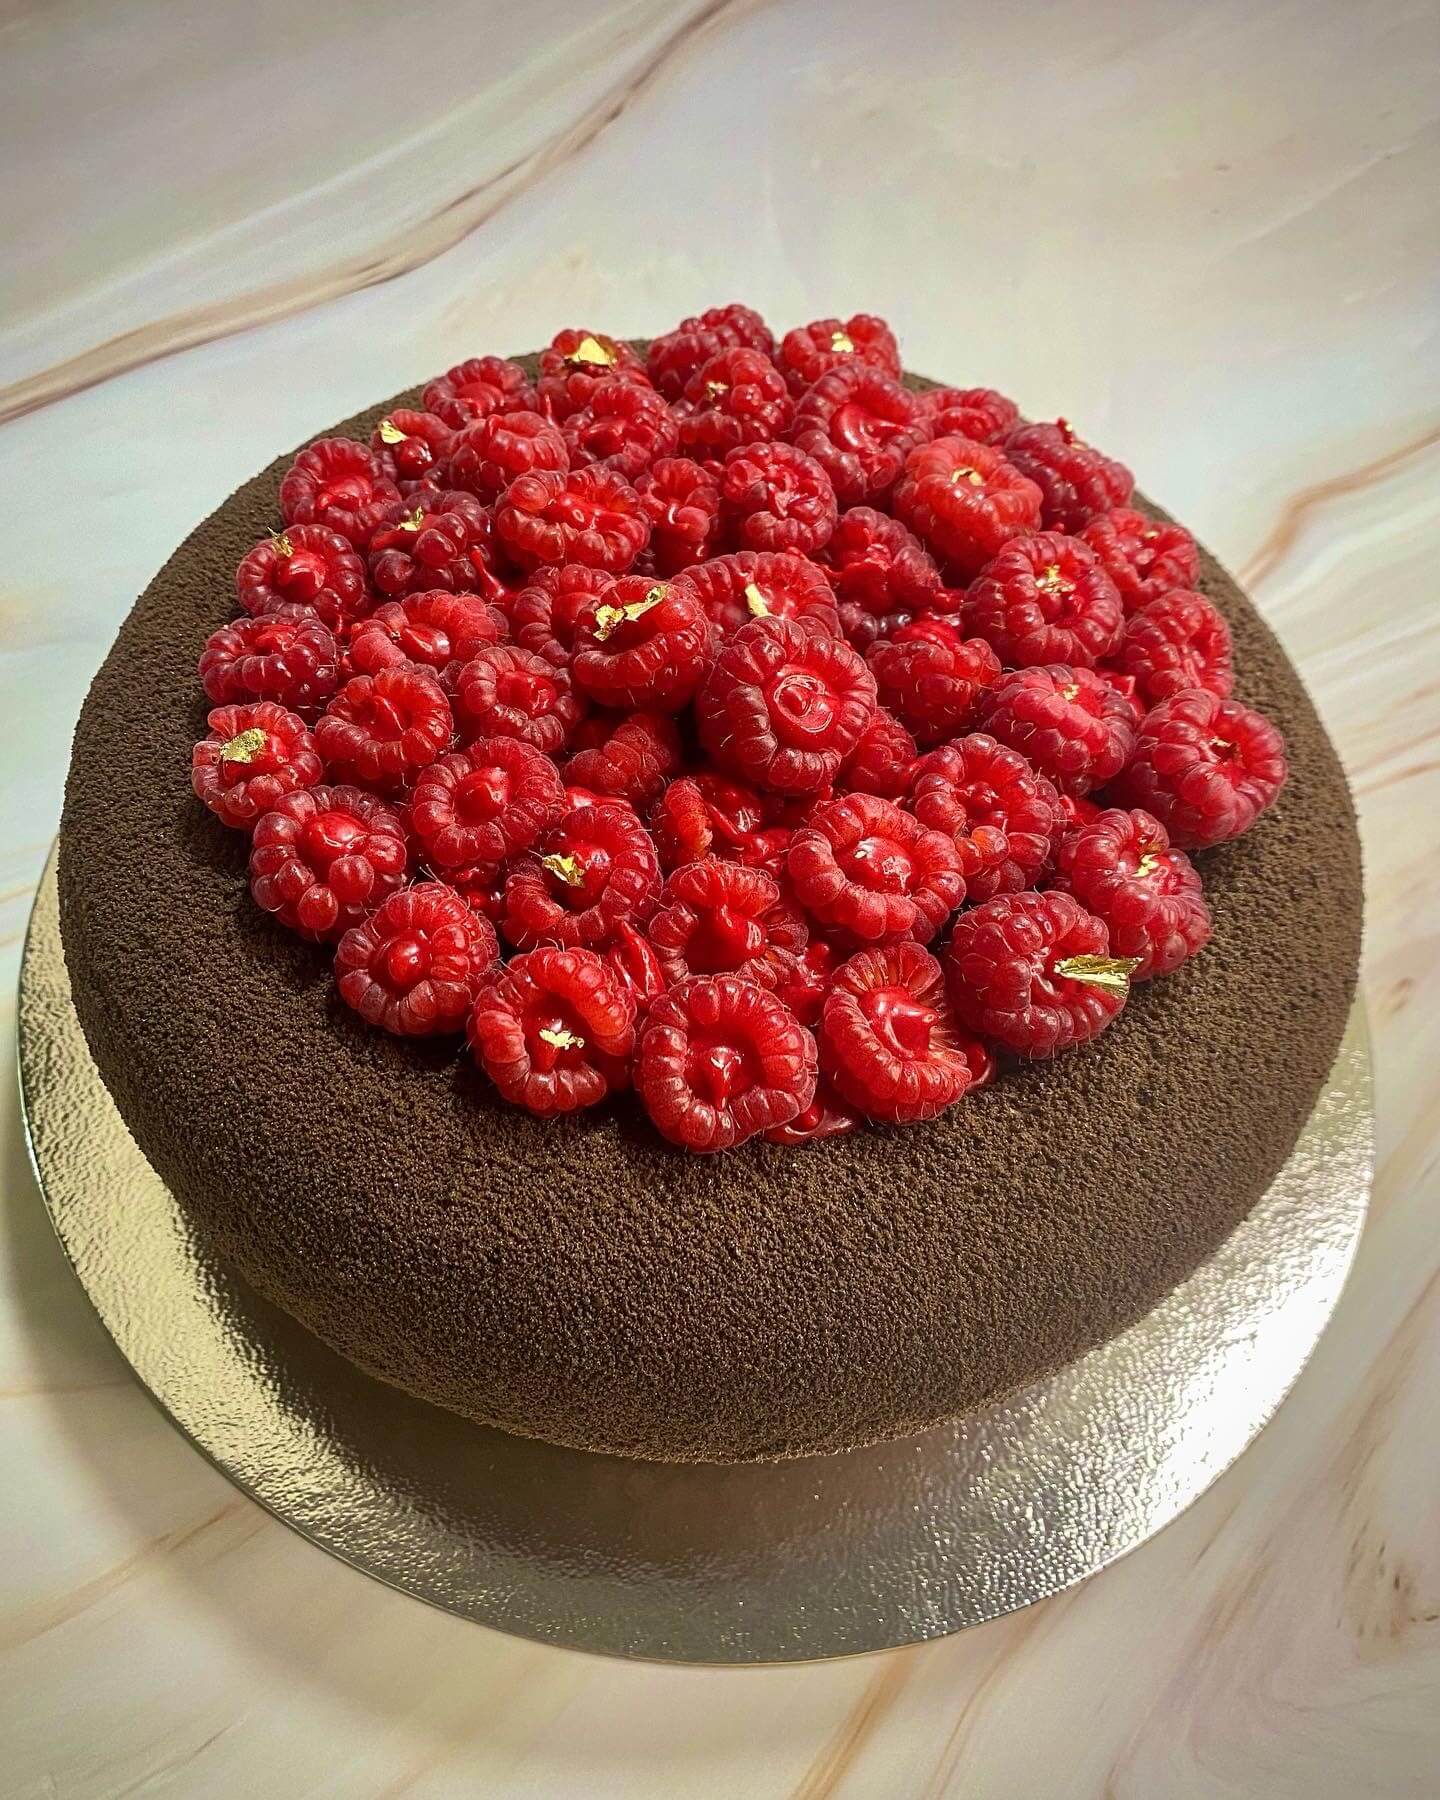 A chocolate cake topped with fresh raspberries.